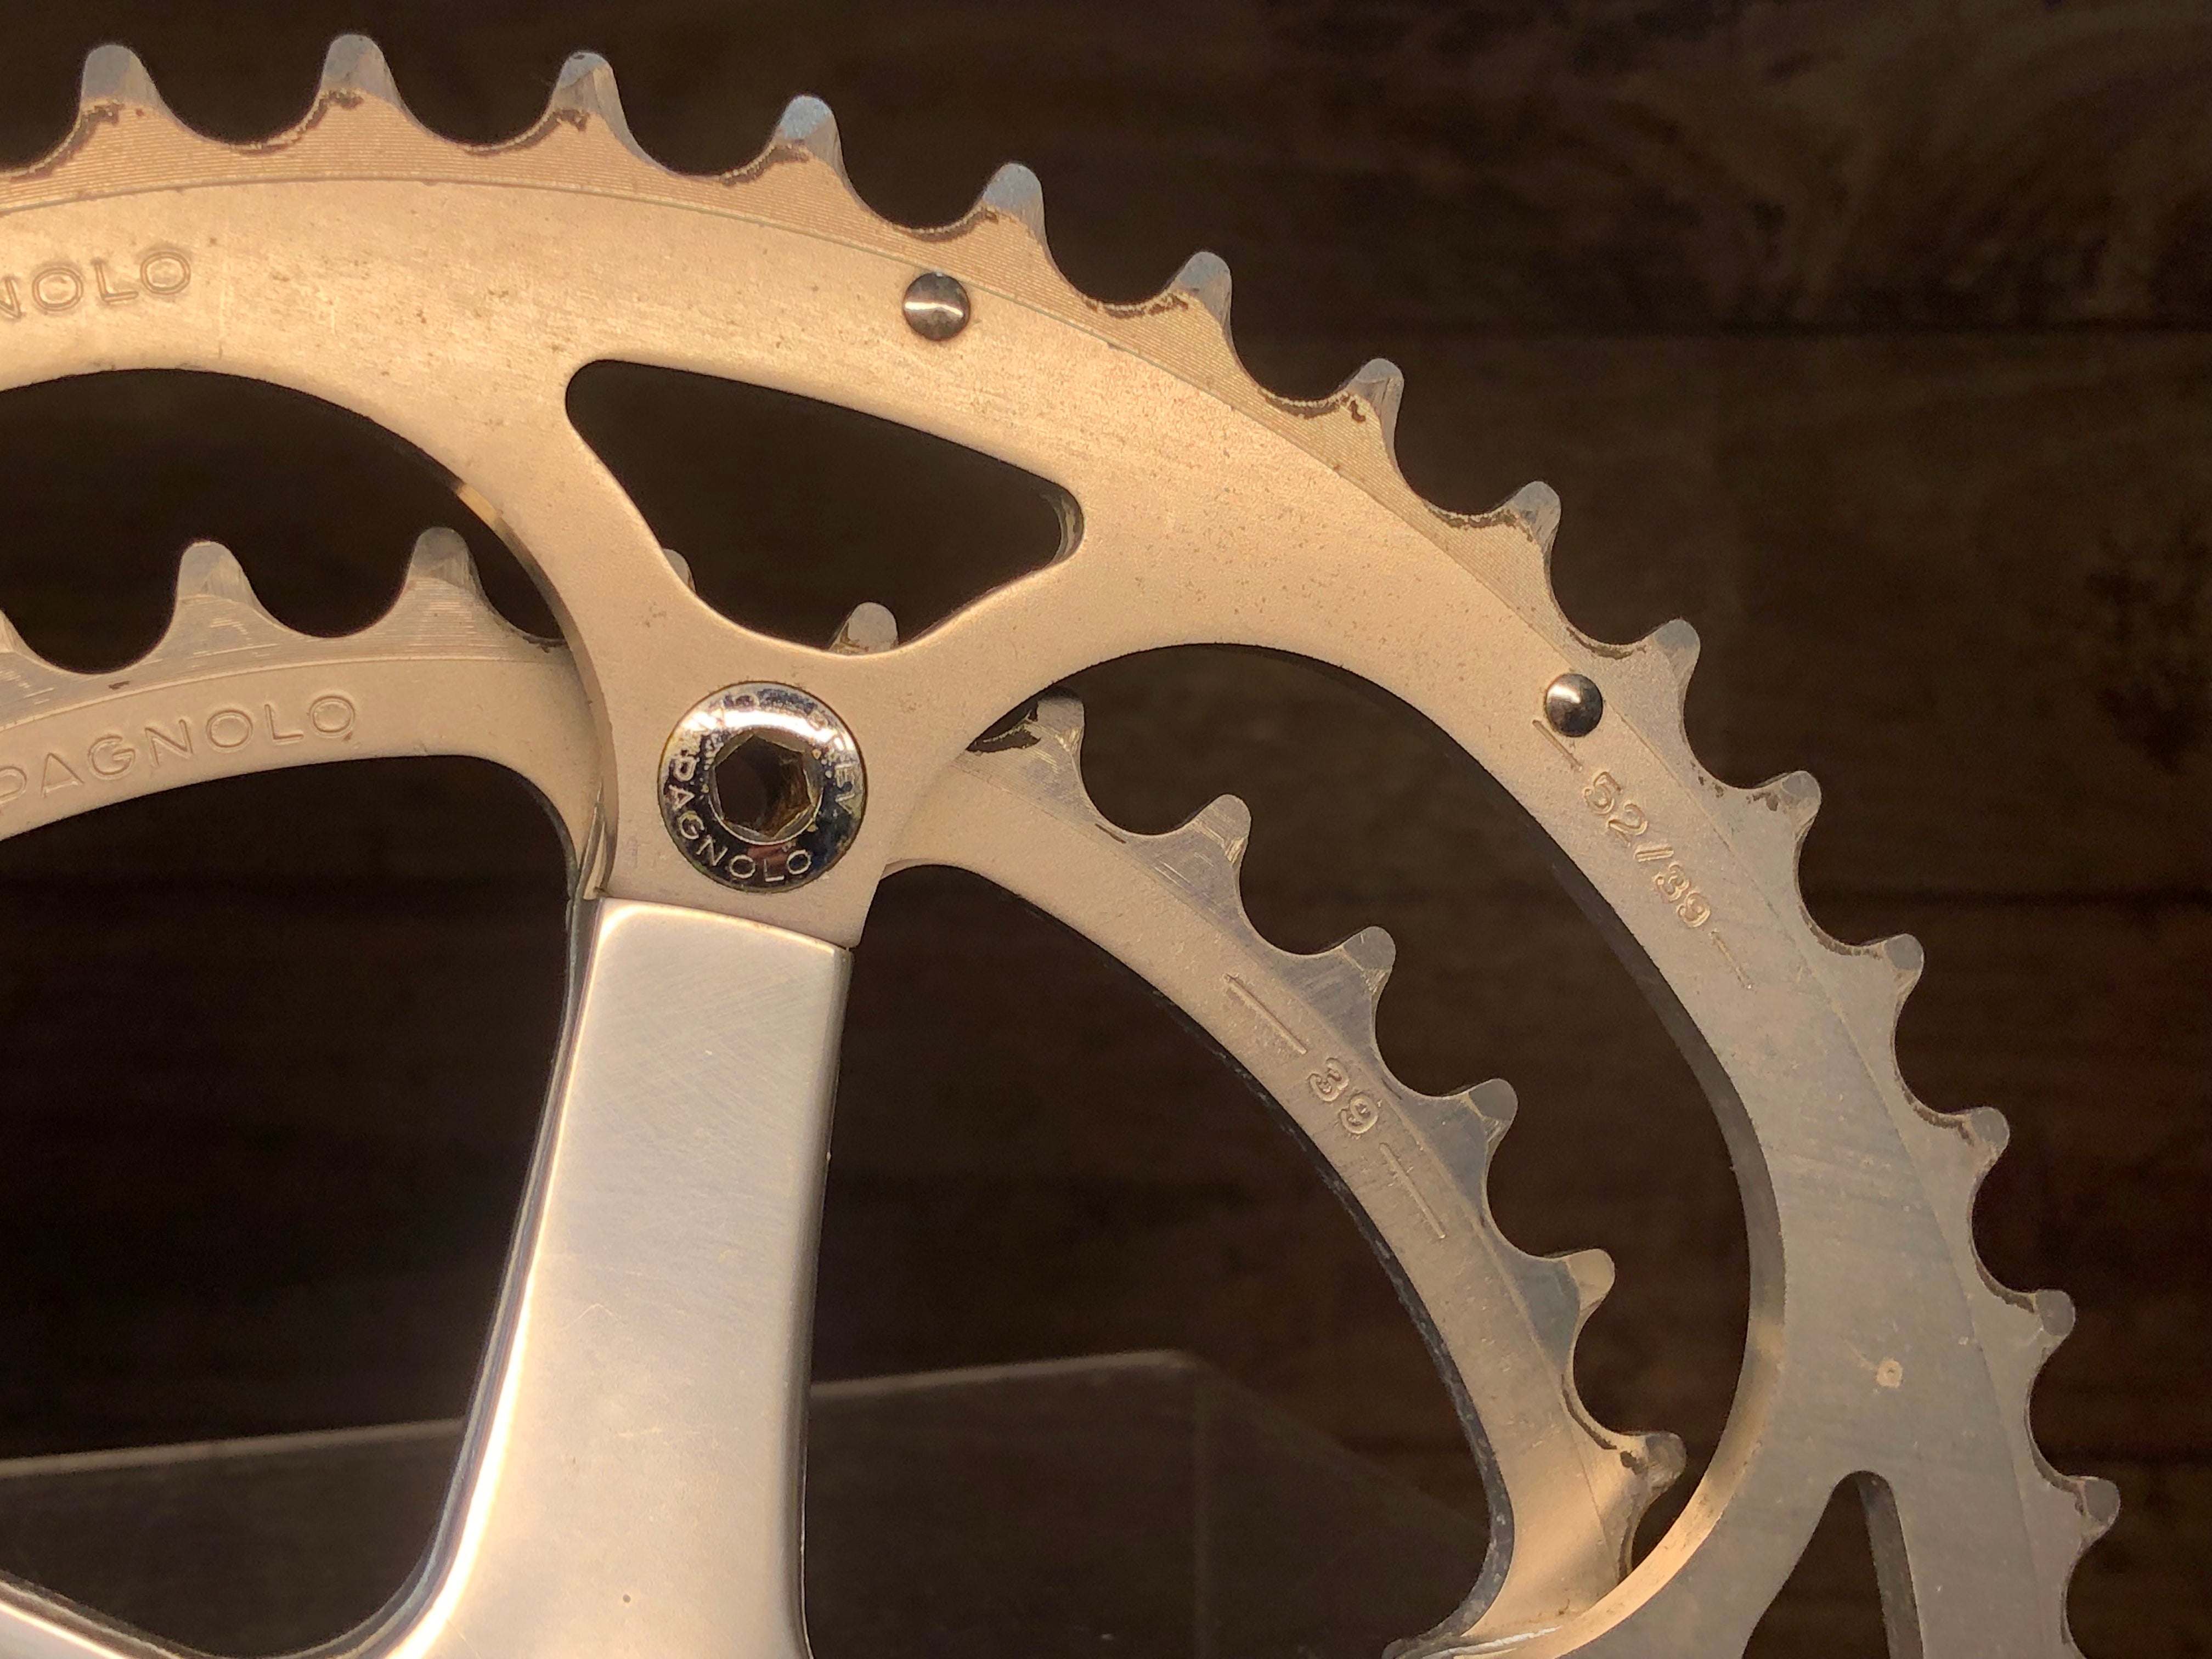 GY613 カンパニョーロ CAMPAGNOLO アテナ ATHENA クランクセット 52/39 170mm 8S